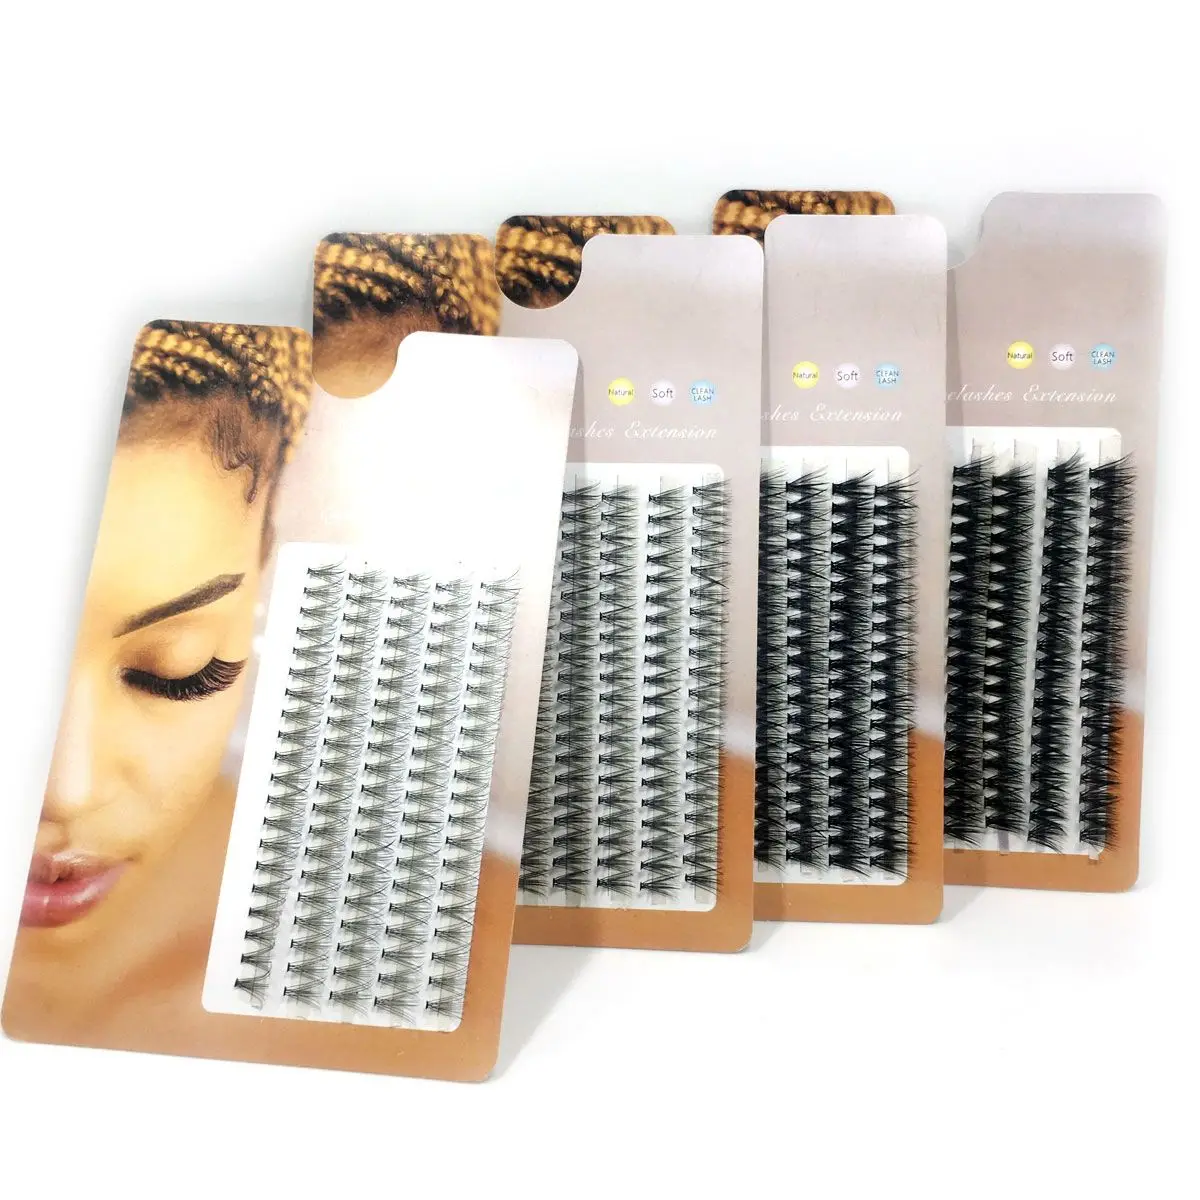 

5Rows 8-16mm Individual Lashes Natural Soft Thick Cluster False Eyelashes Mink Volume Eyelashes Eye Extension 10D/20D/30D/40D